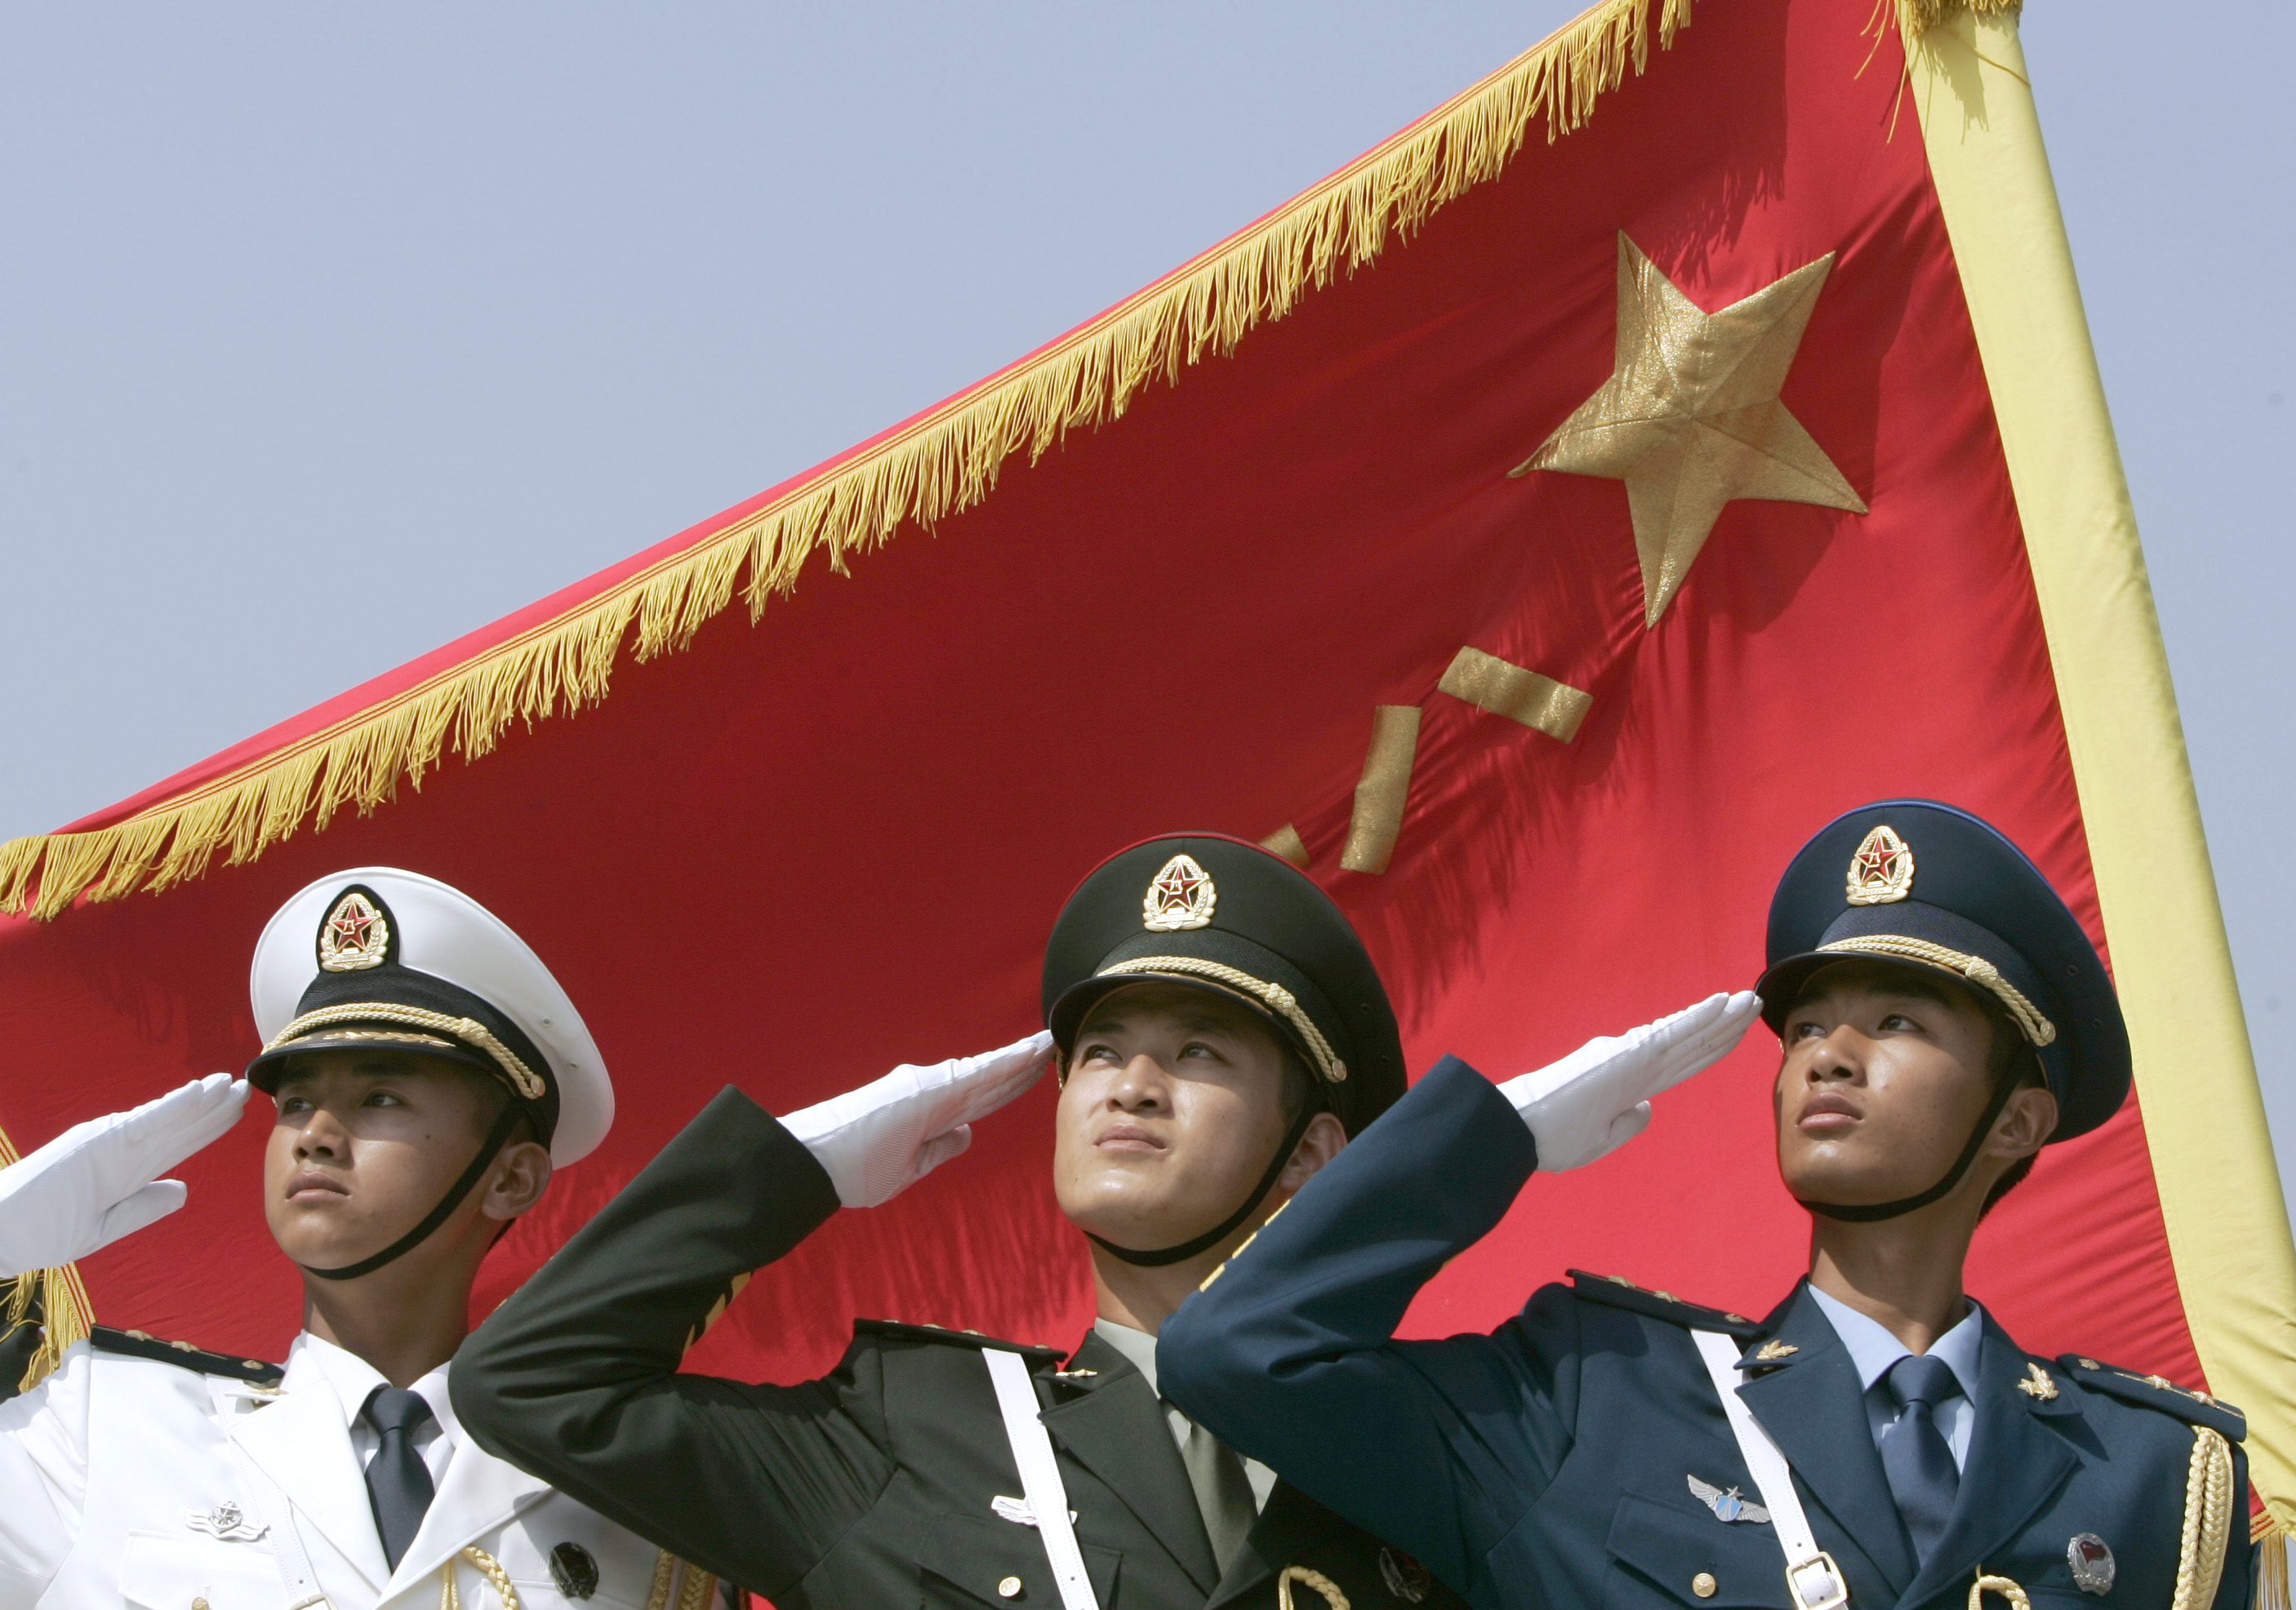 Honour guards from the navy, land, and air force dress in the latest uniform and salute in formation in Beijing